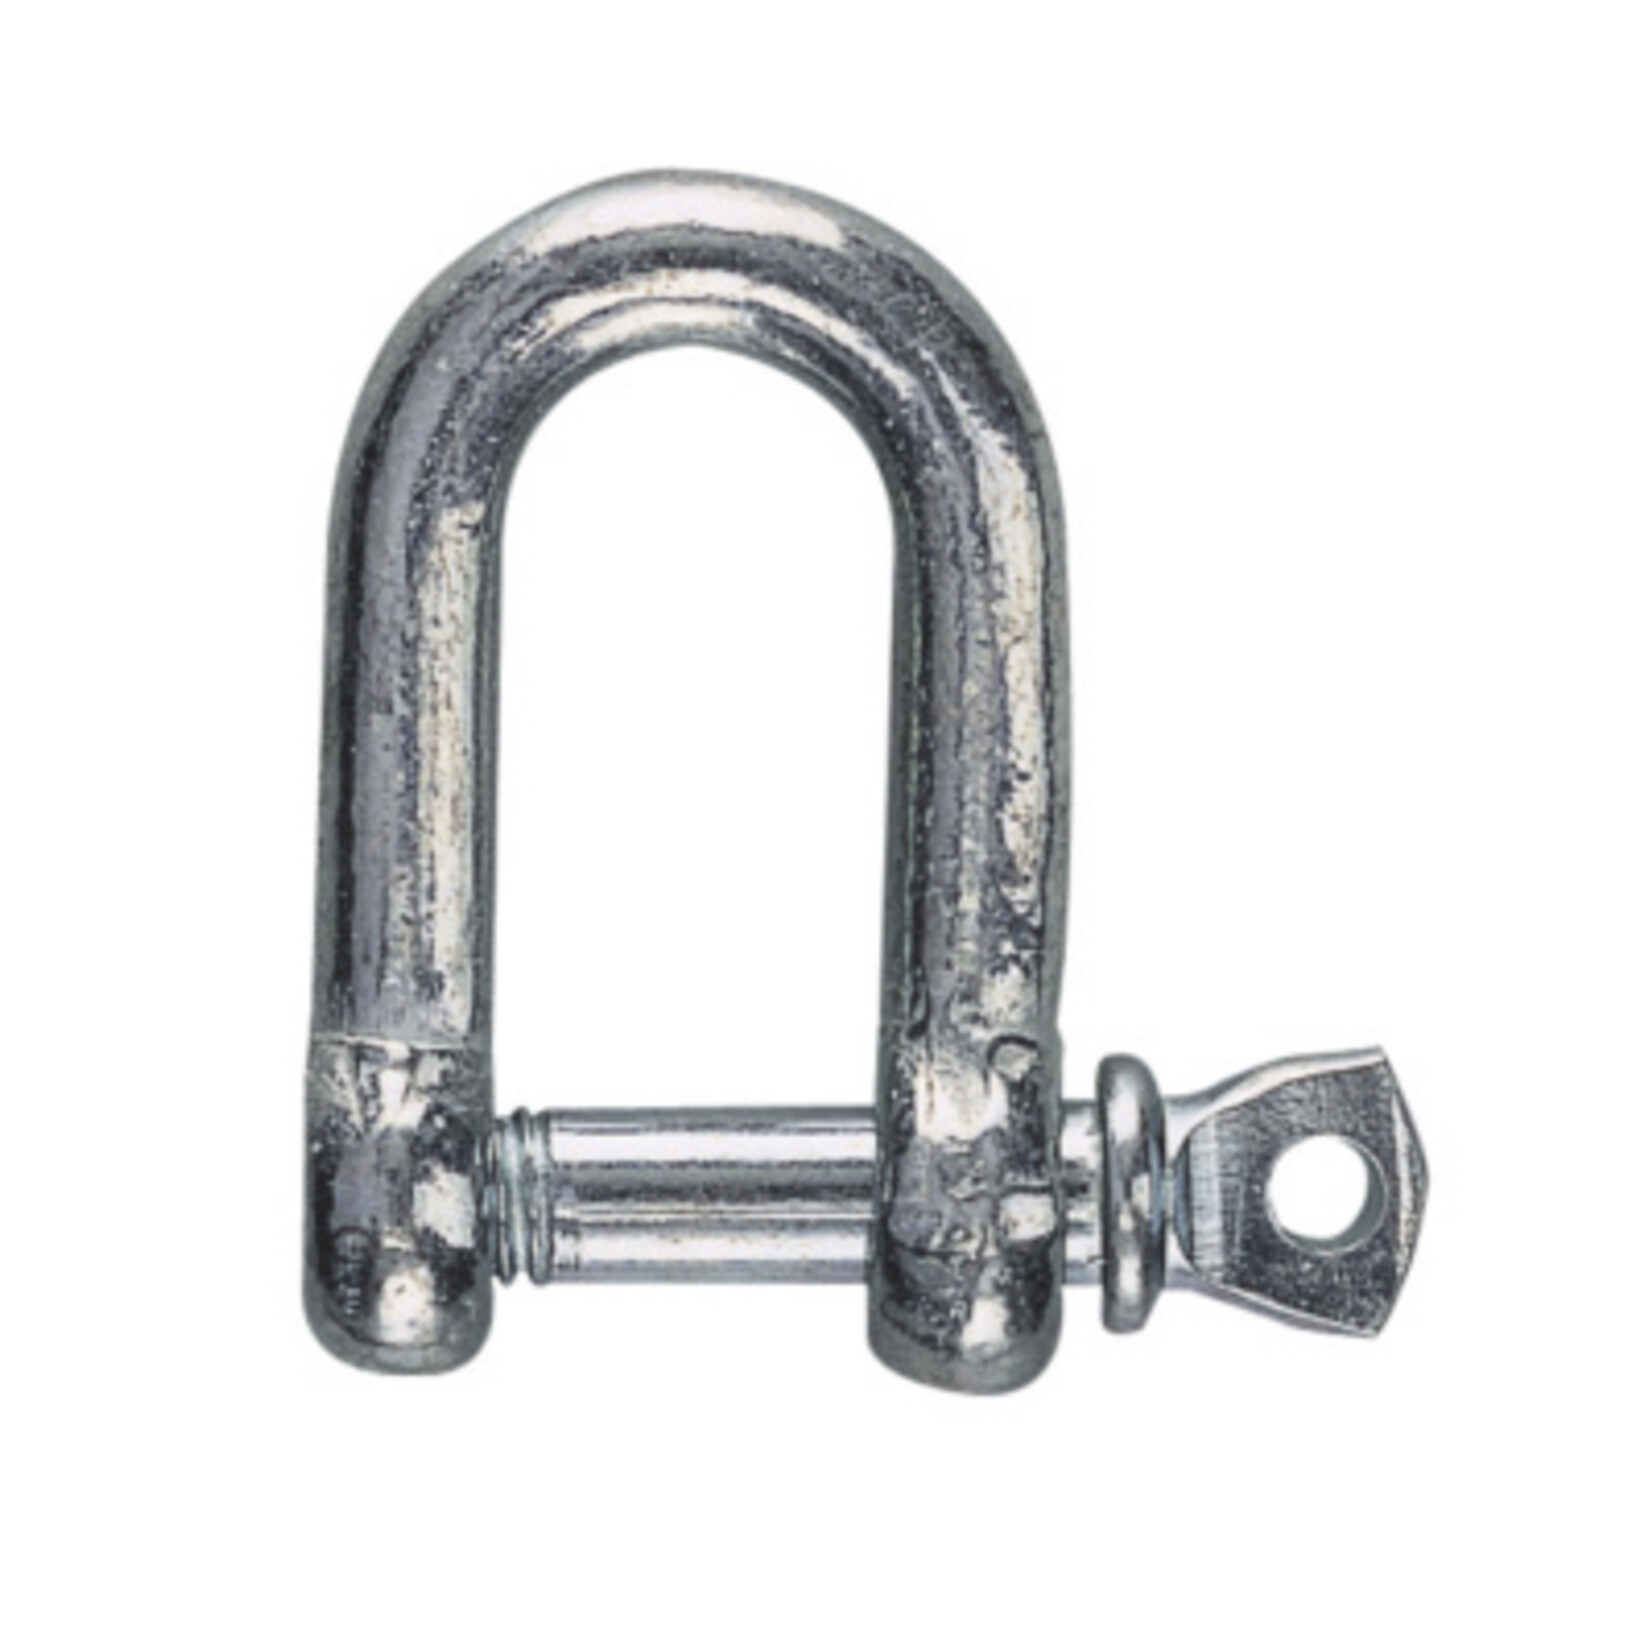 Plastimo Shackle gal d-shap dia 16mm yellow code